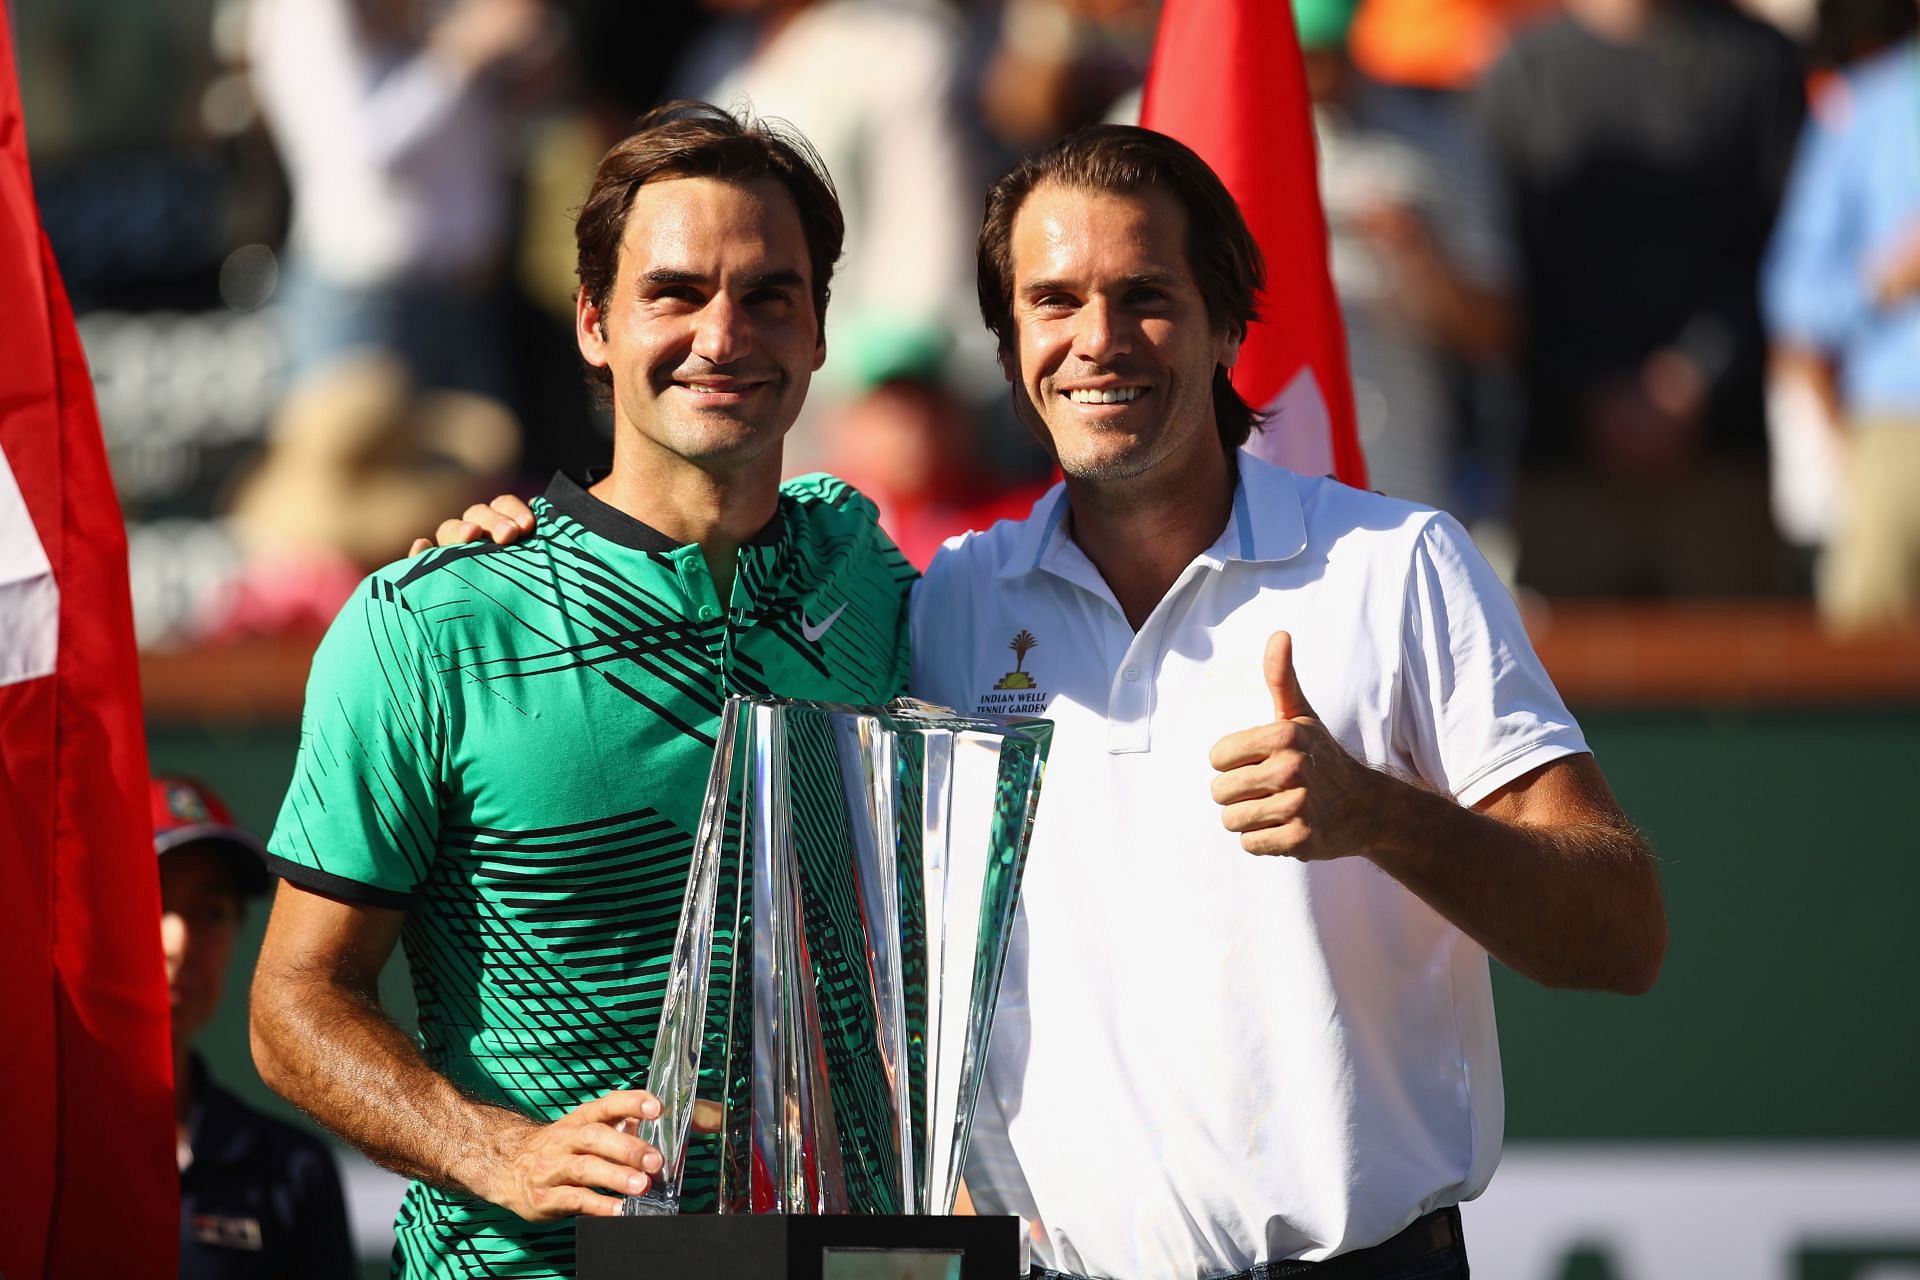 Roger Federer with Tommy Haas after the former won the 2017 BNP Paribas Open